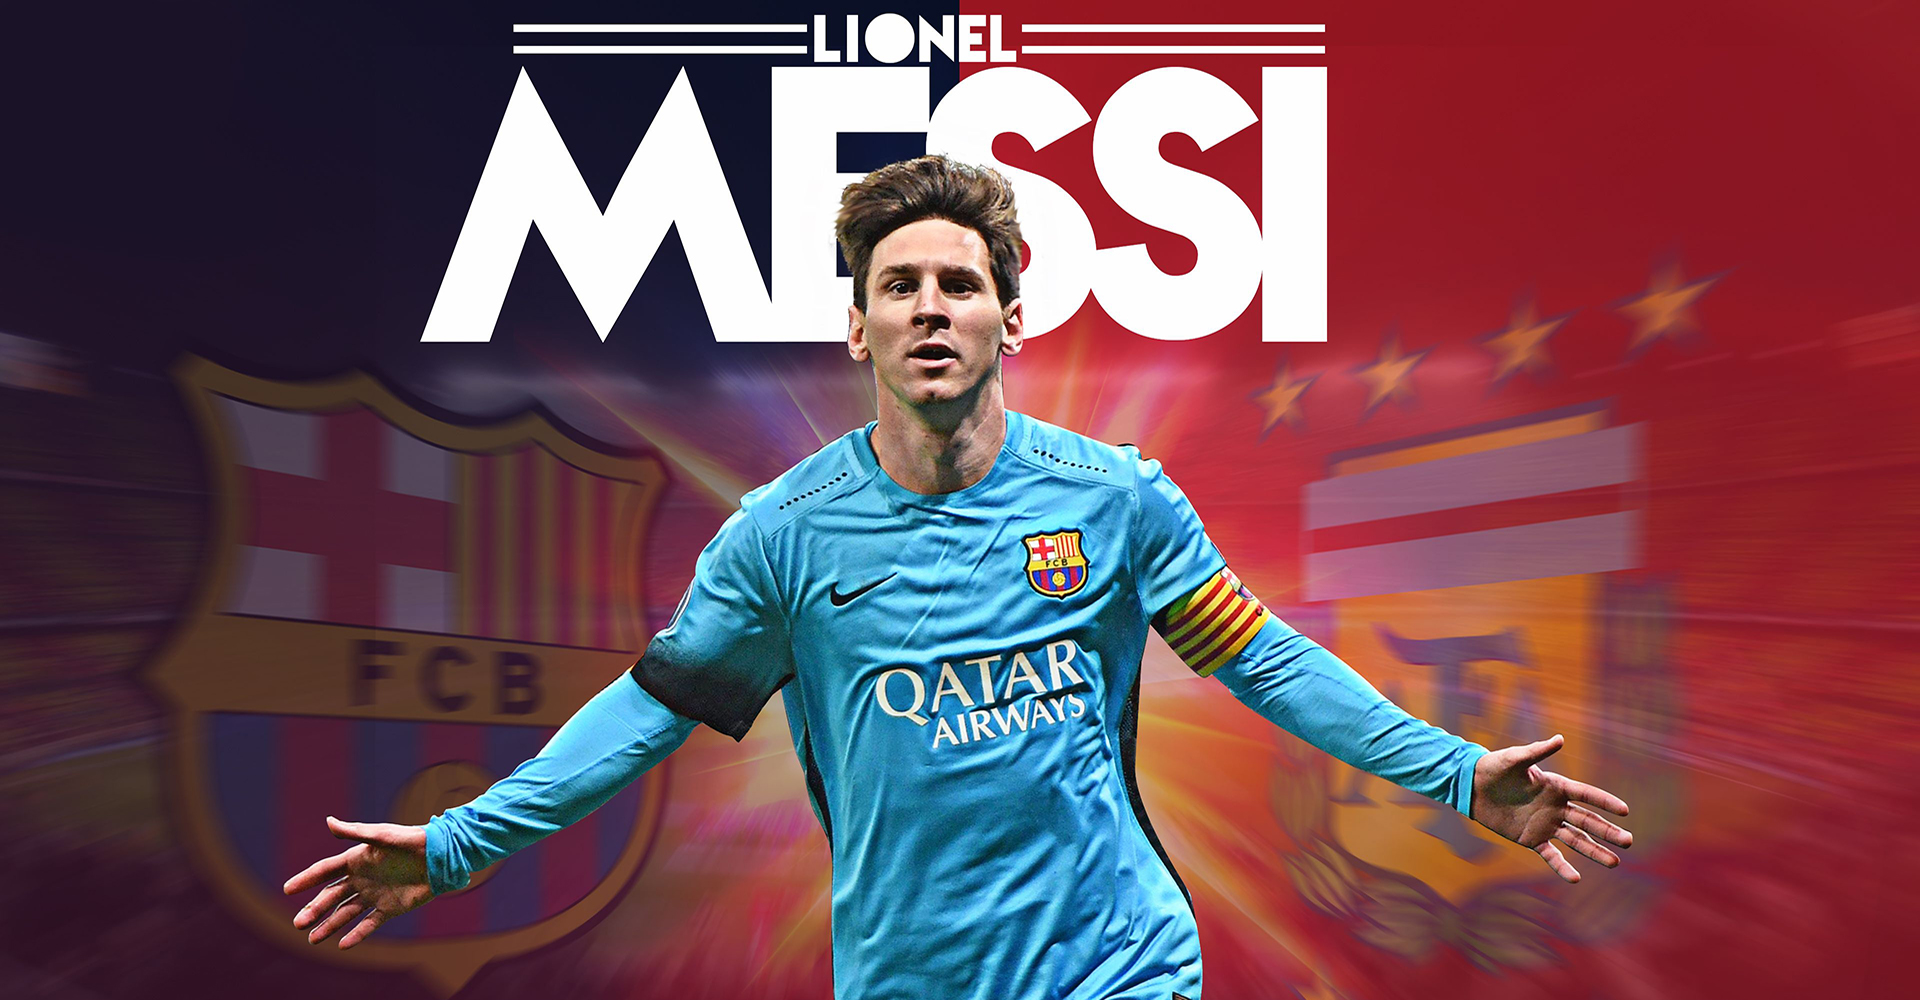 Lionel Messi 10, The Goat, for both Barcelona FC and Argentina